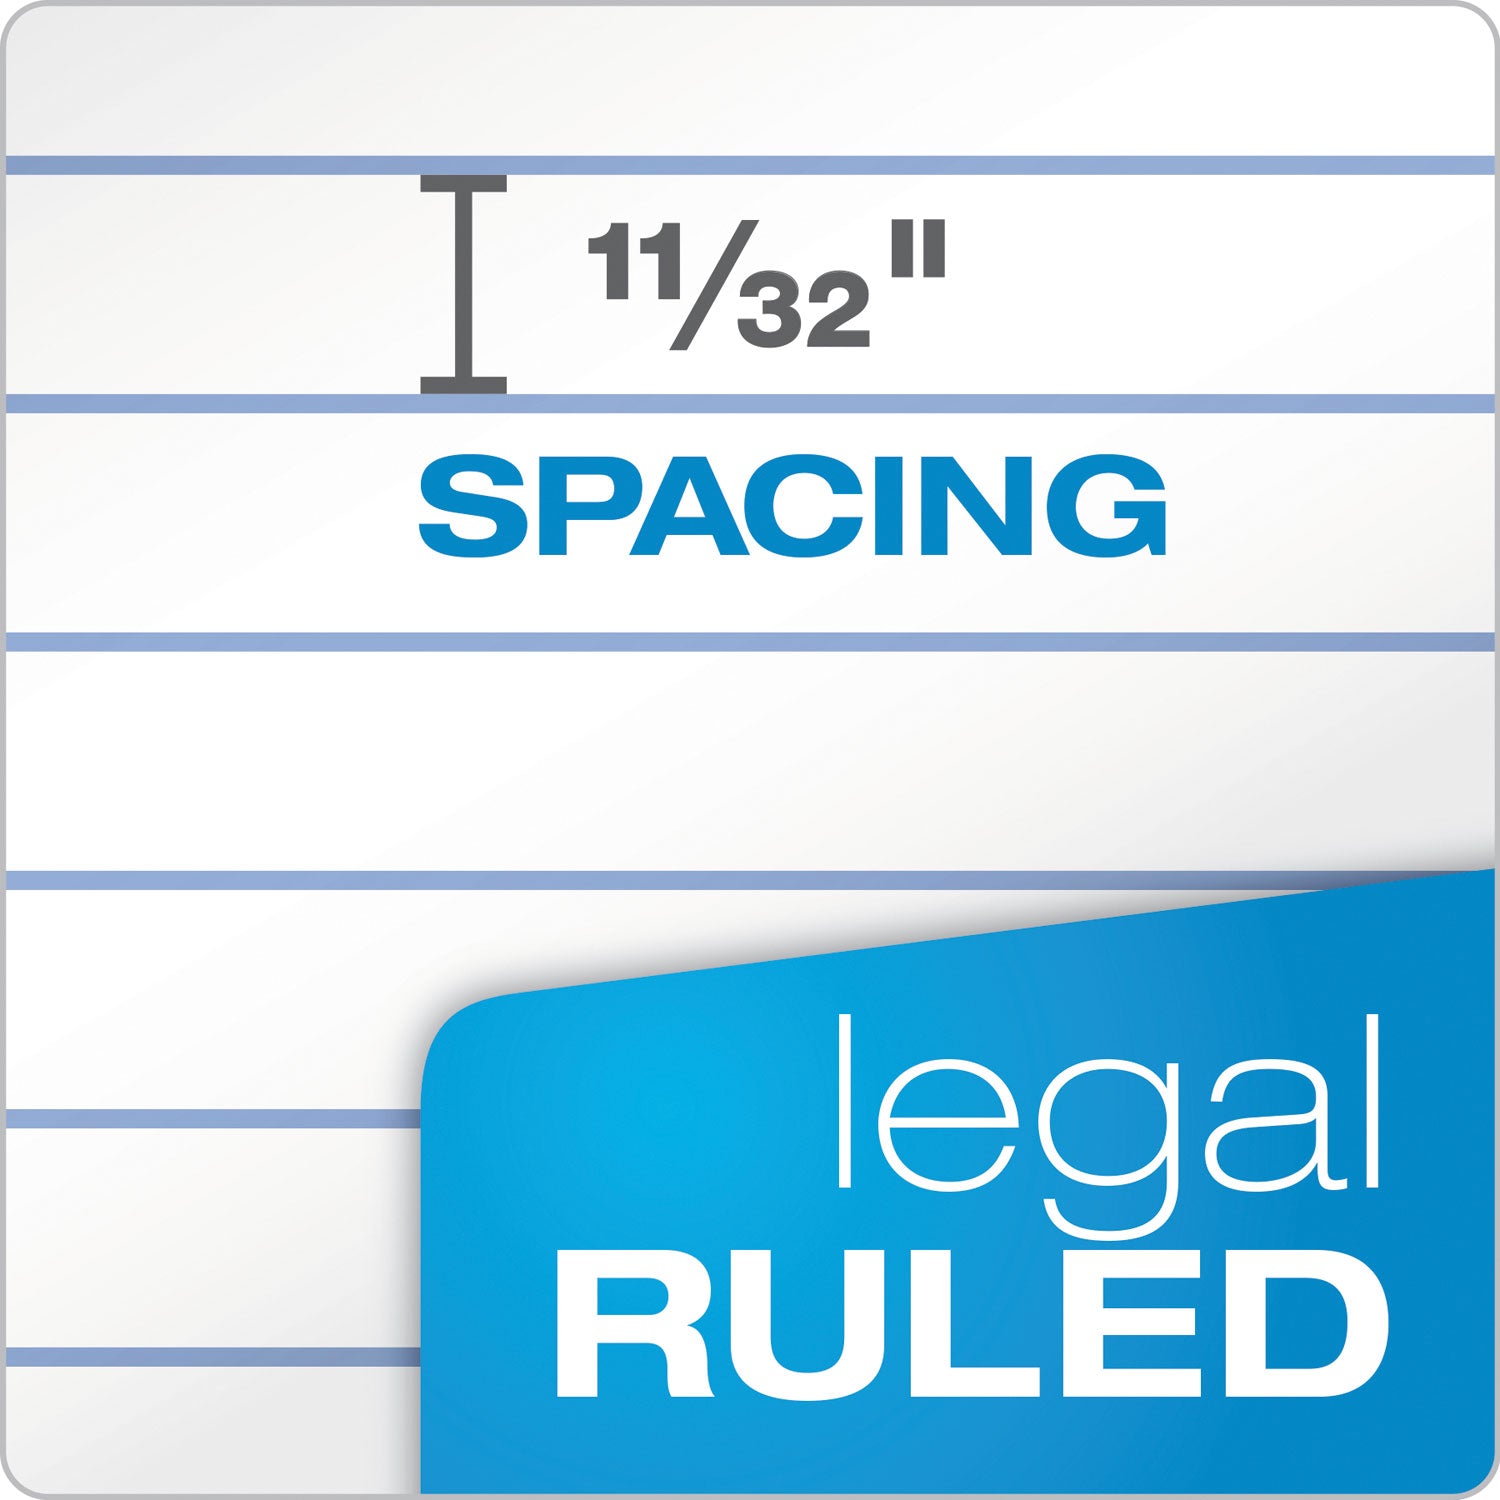 The Legal Pad" Ruled Perforated Pads, Wide/Legal Rule, 50 White 8.5 x 11.75 Sheets - 